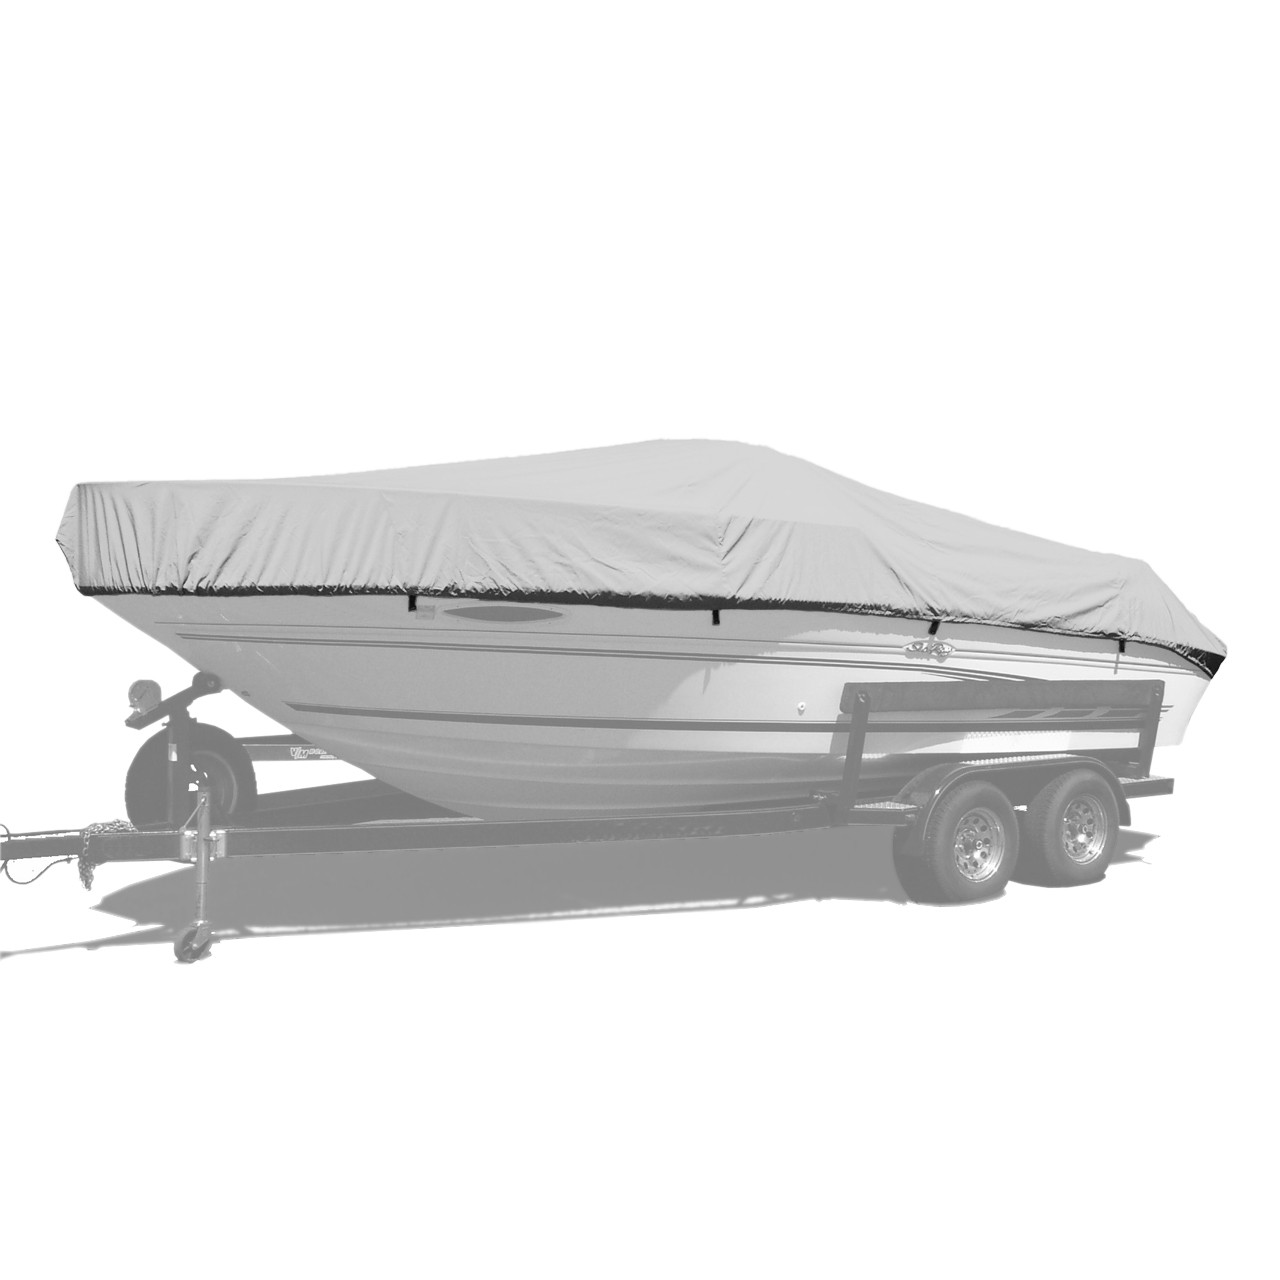 GREY BOAT COVER FOR TRACKER 1600 TF FISHING BASS